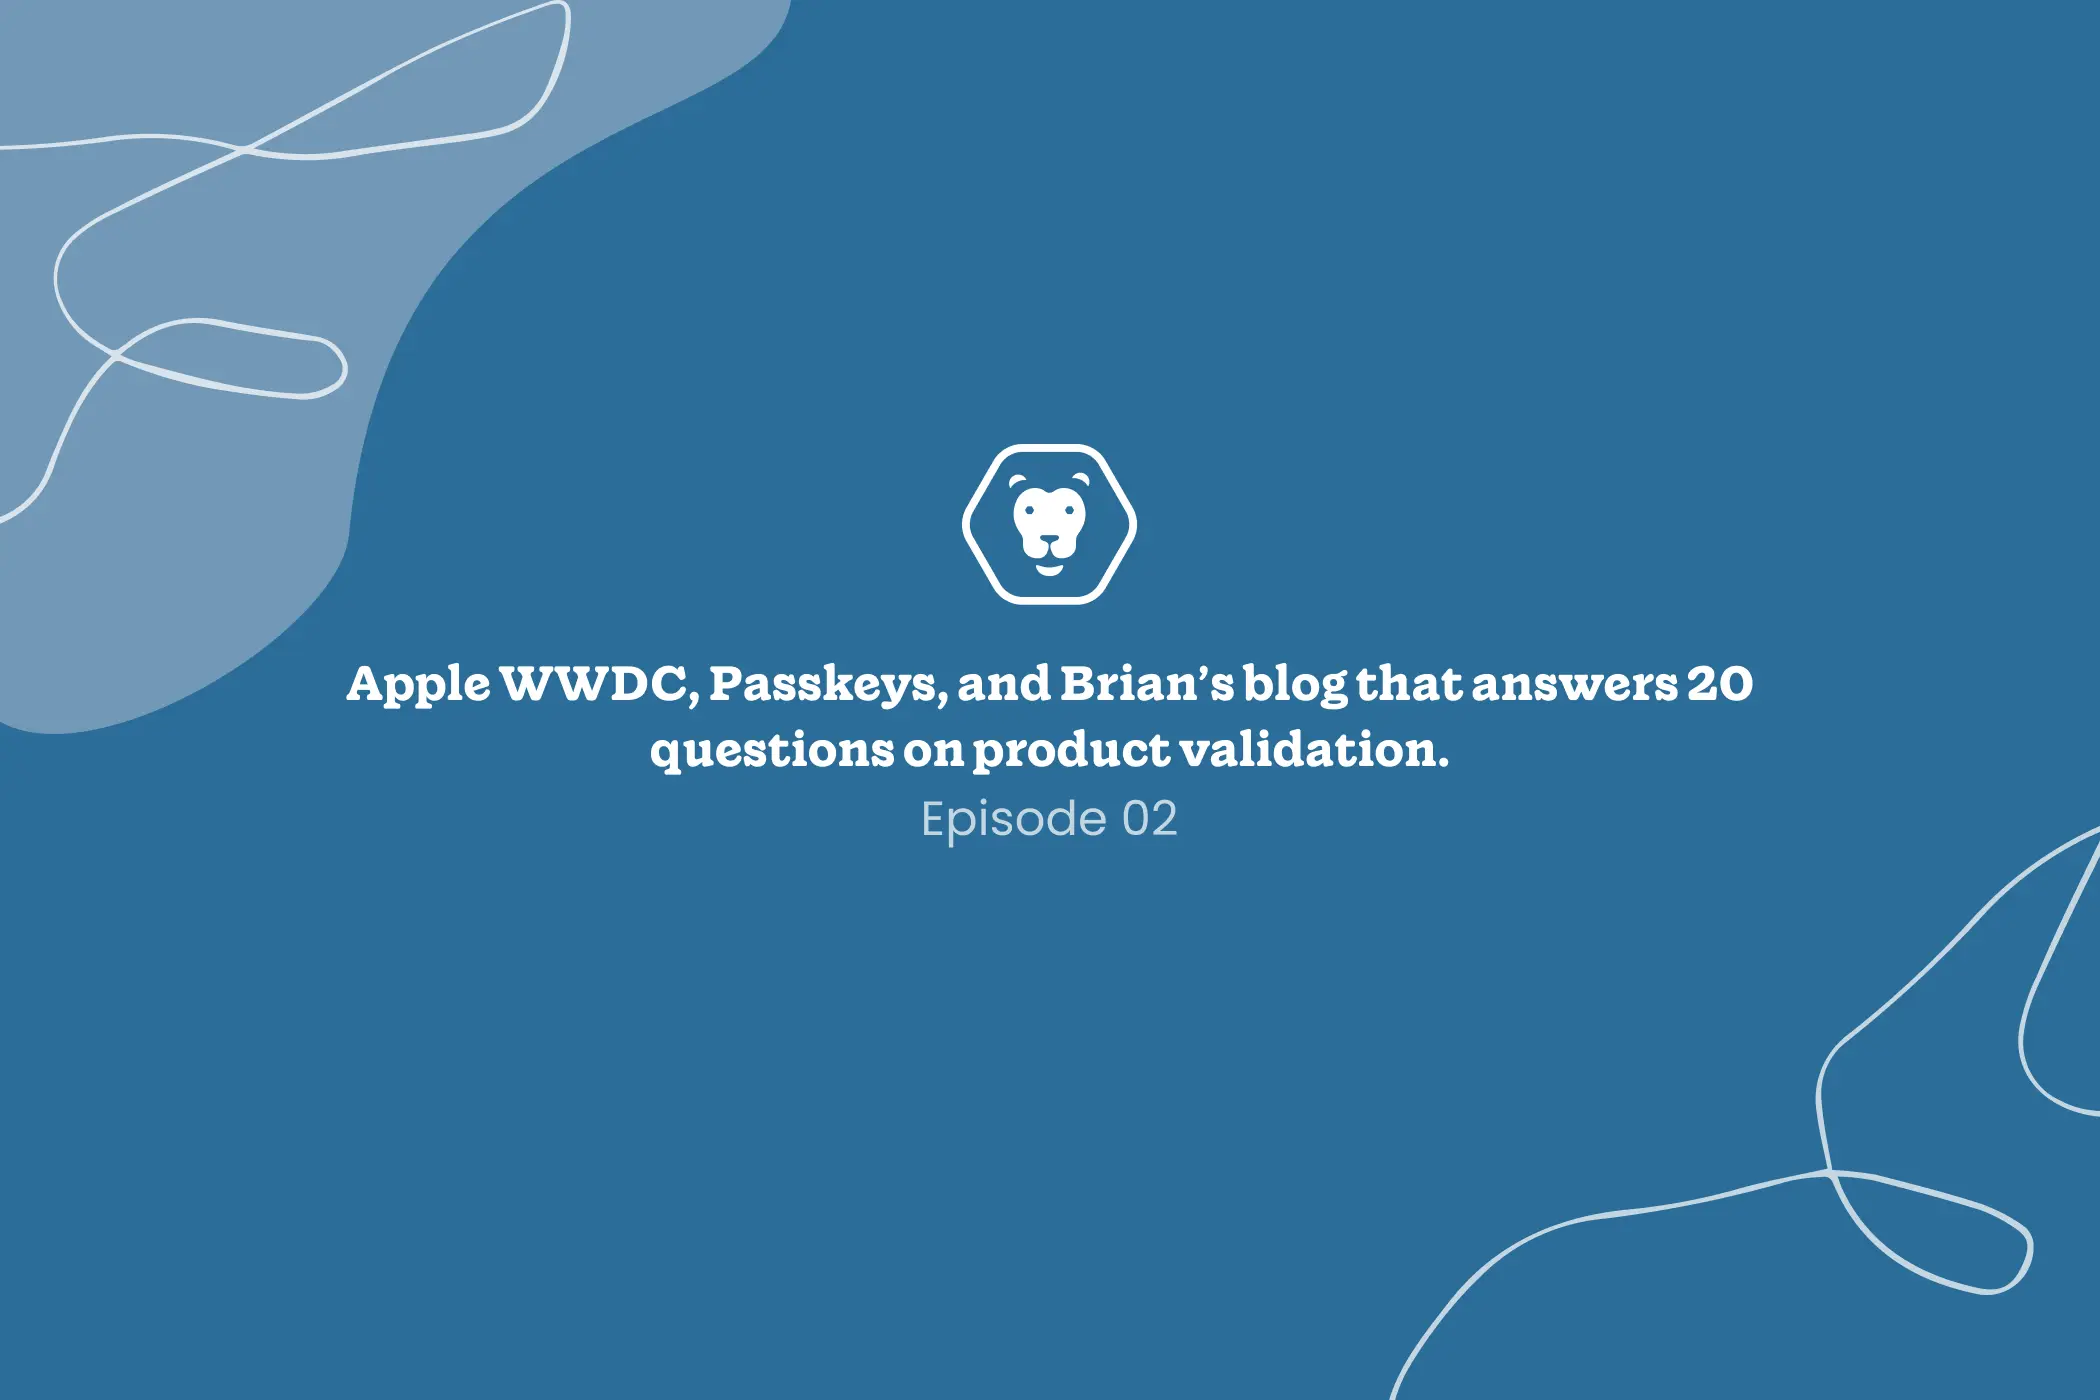 Apple WWDC, Passkeys, the PR heard ‘round the world, and Brian's blog that answers 20 questions on product validation.